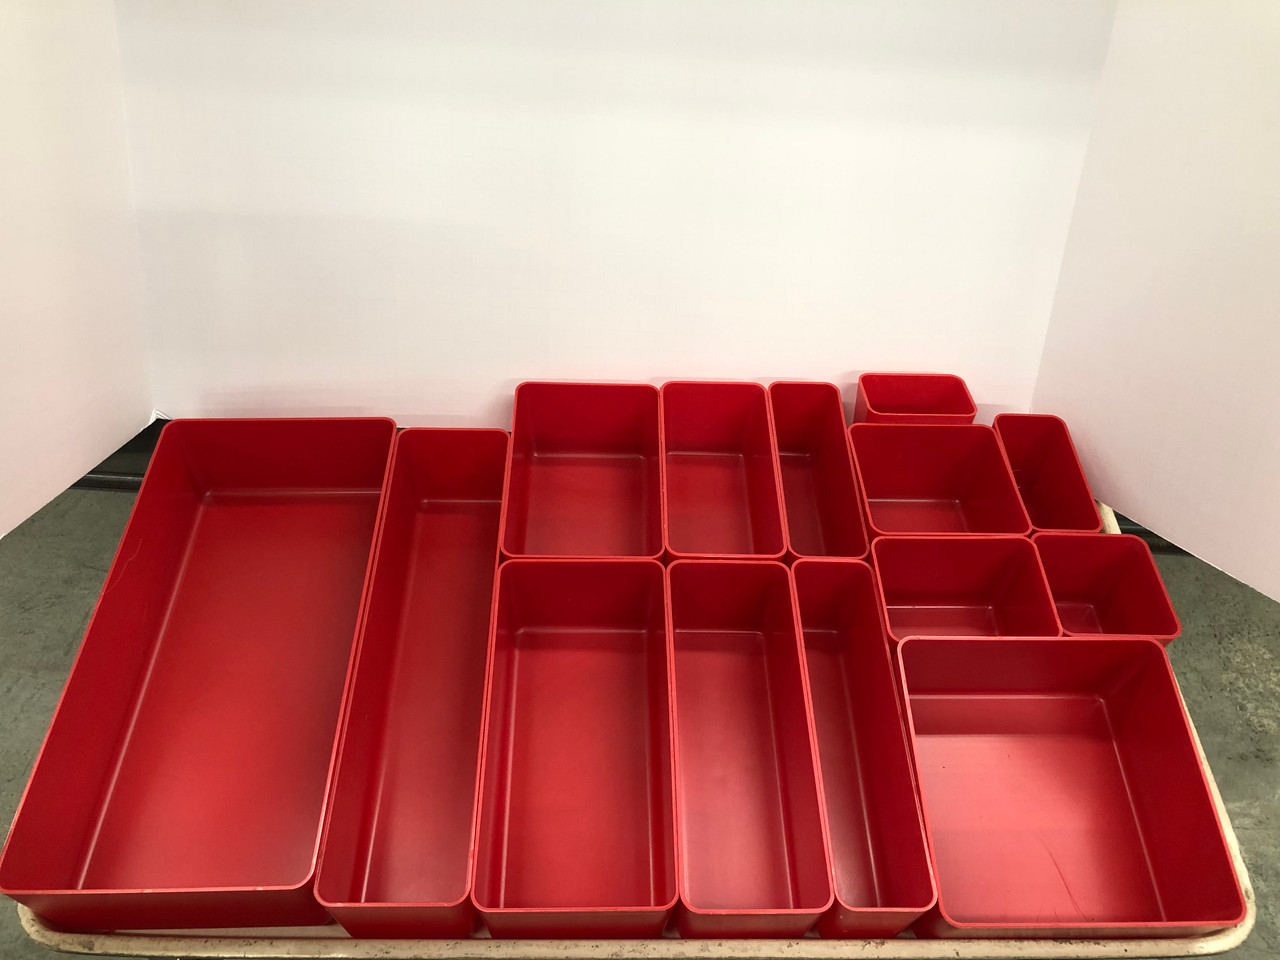 3 Deep Red Plastic Box Sample Assortment (1 each of 14 sizes)